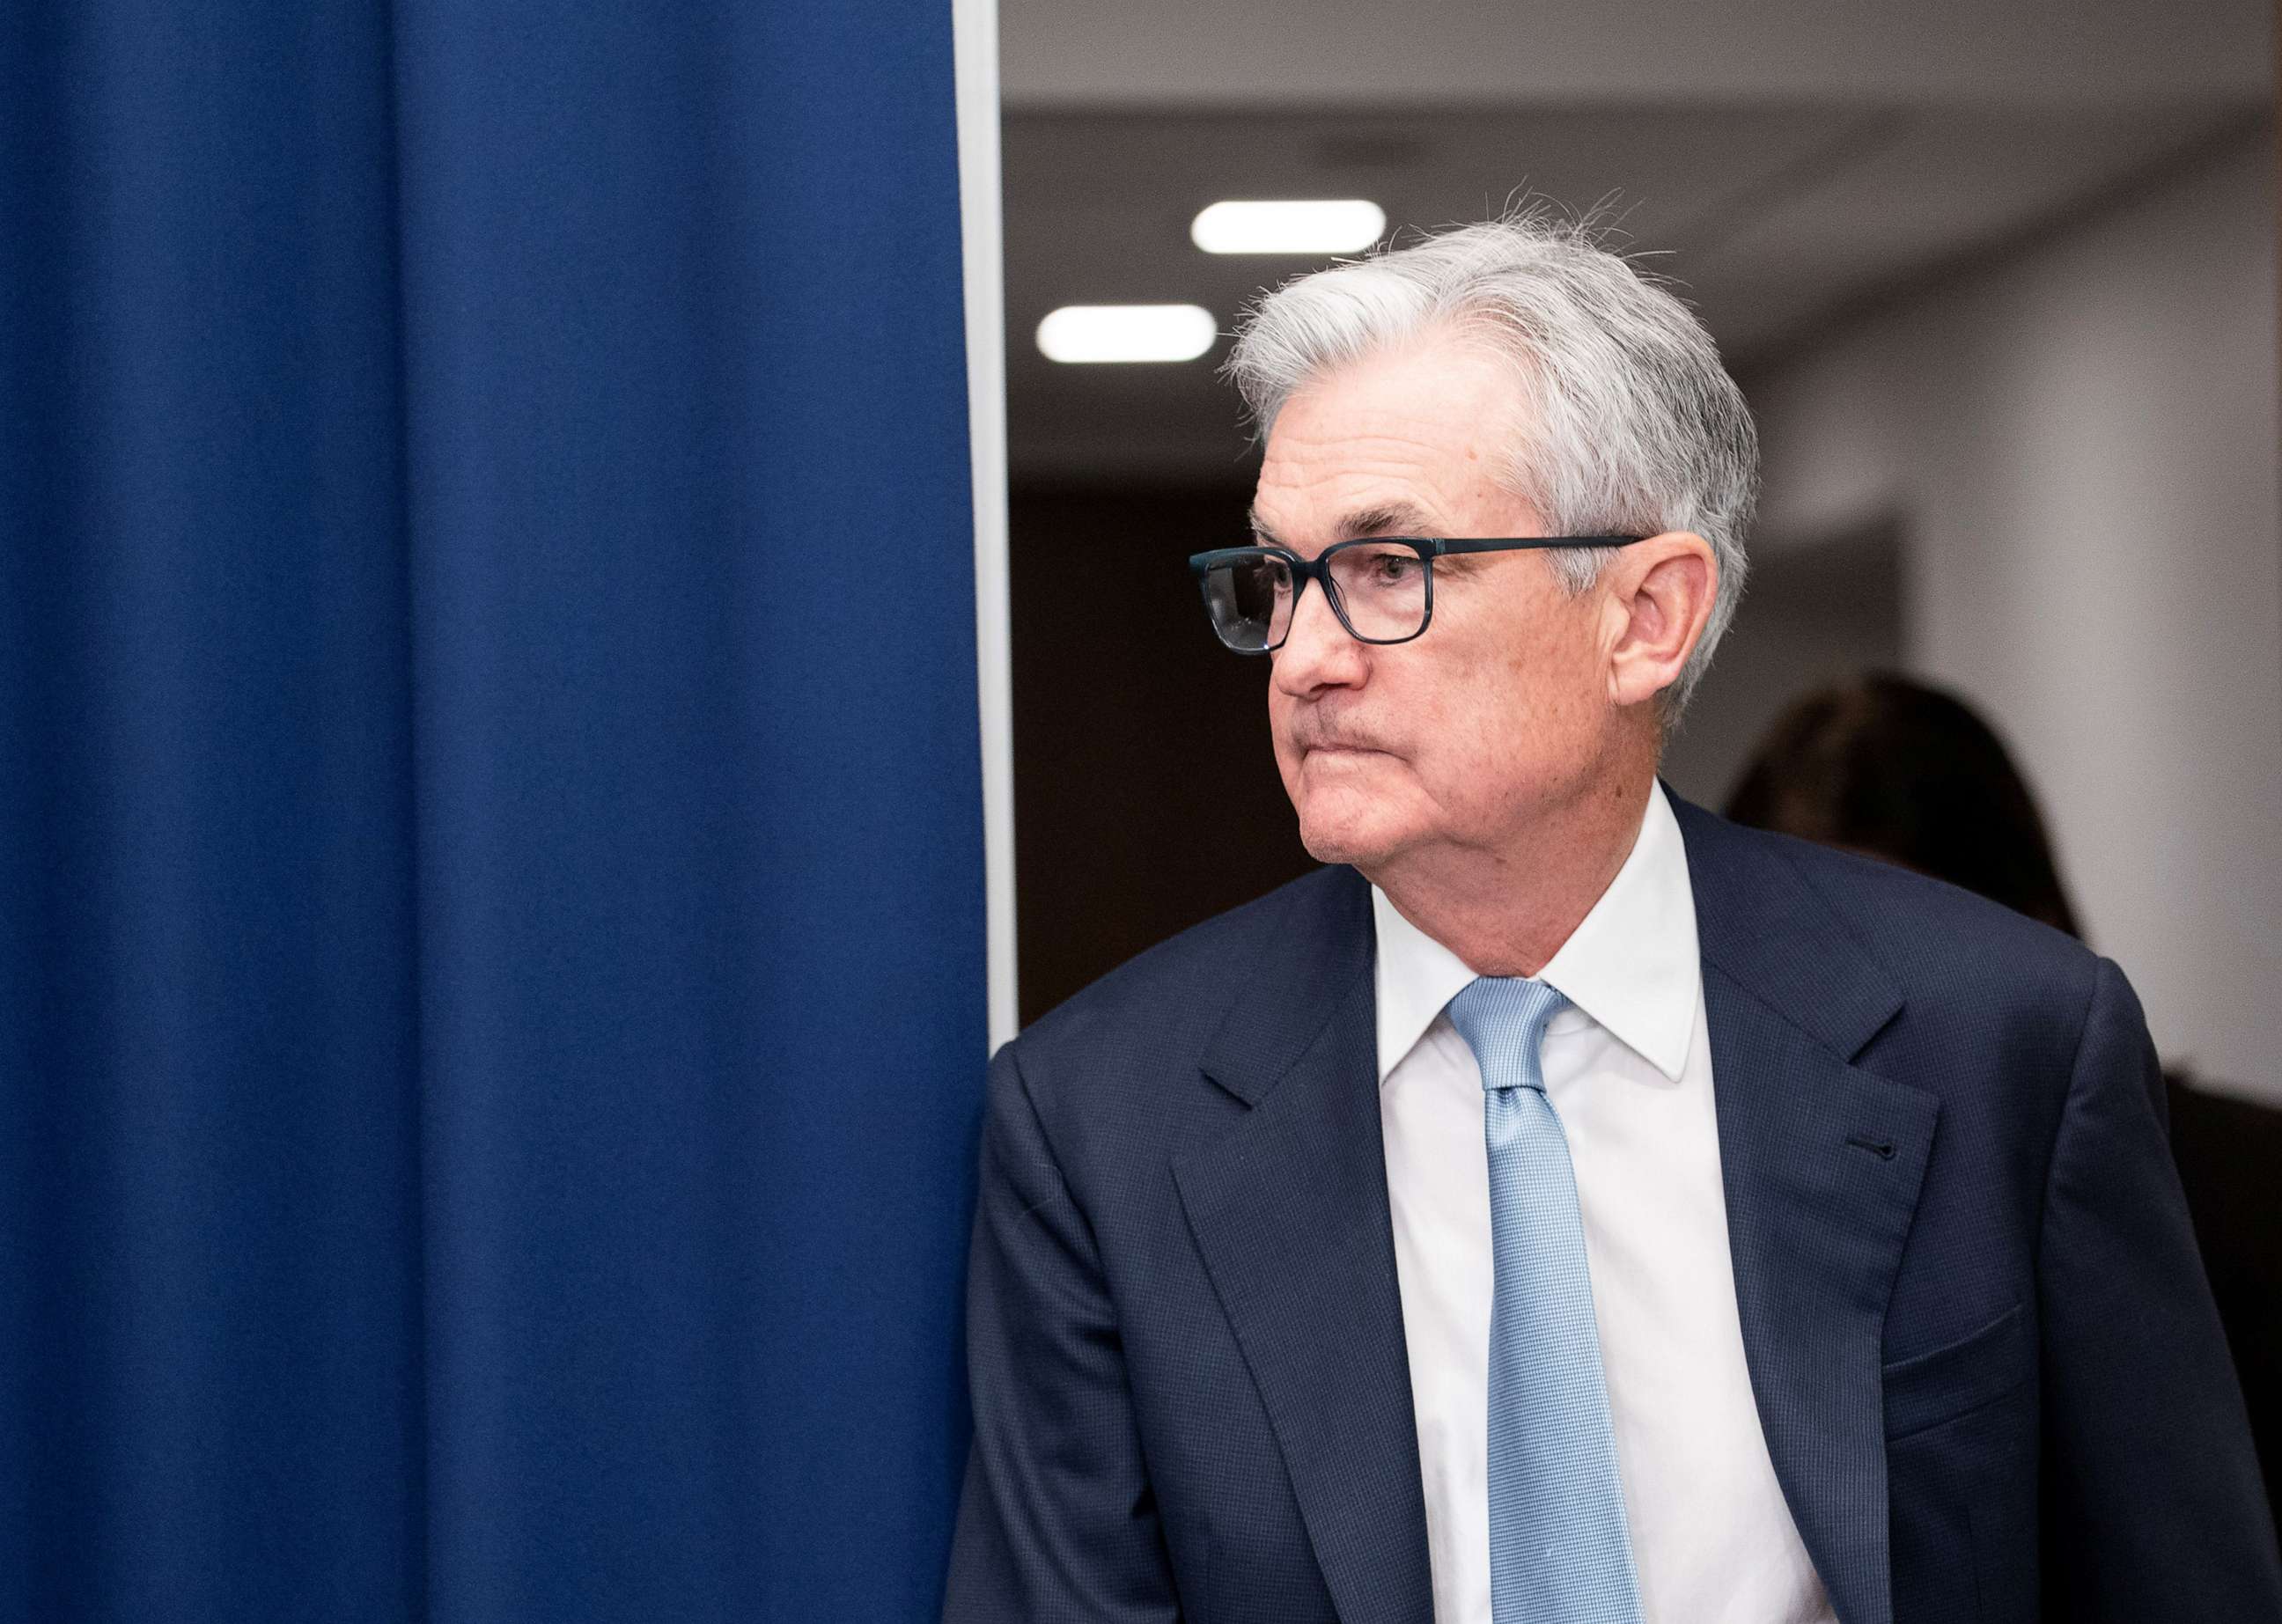 PHOTO: U.S. Federal Reserve Chair Jerome Powell attends a press conference, March 22, 2023, in Washington.